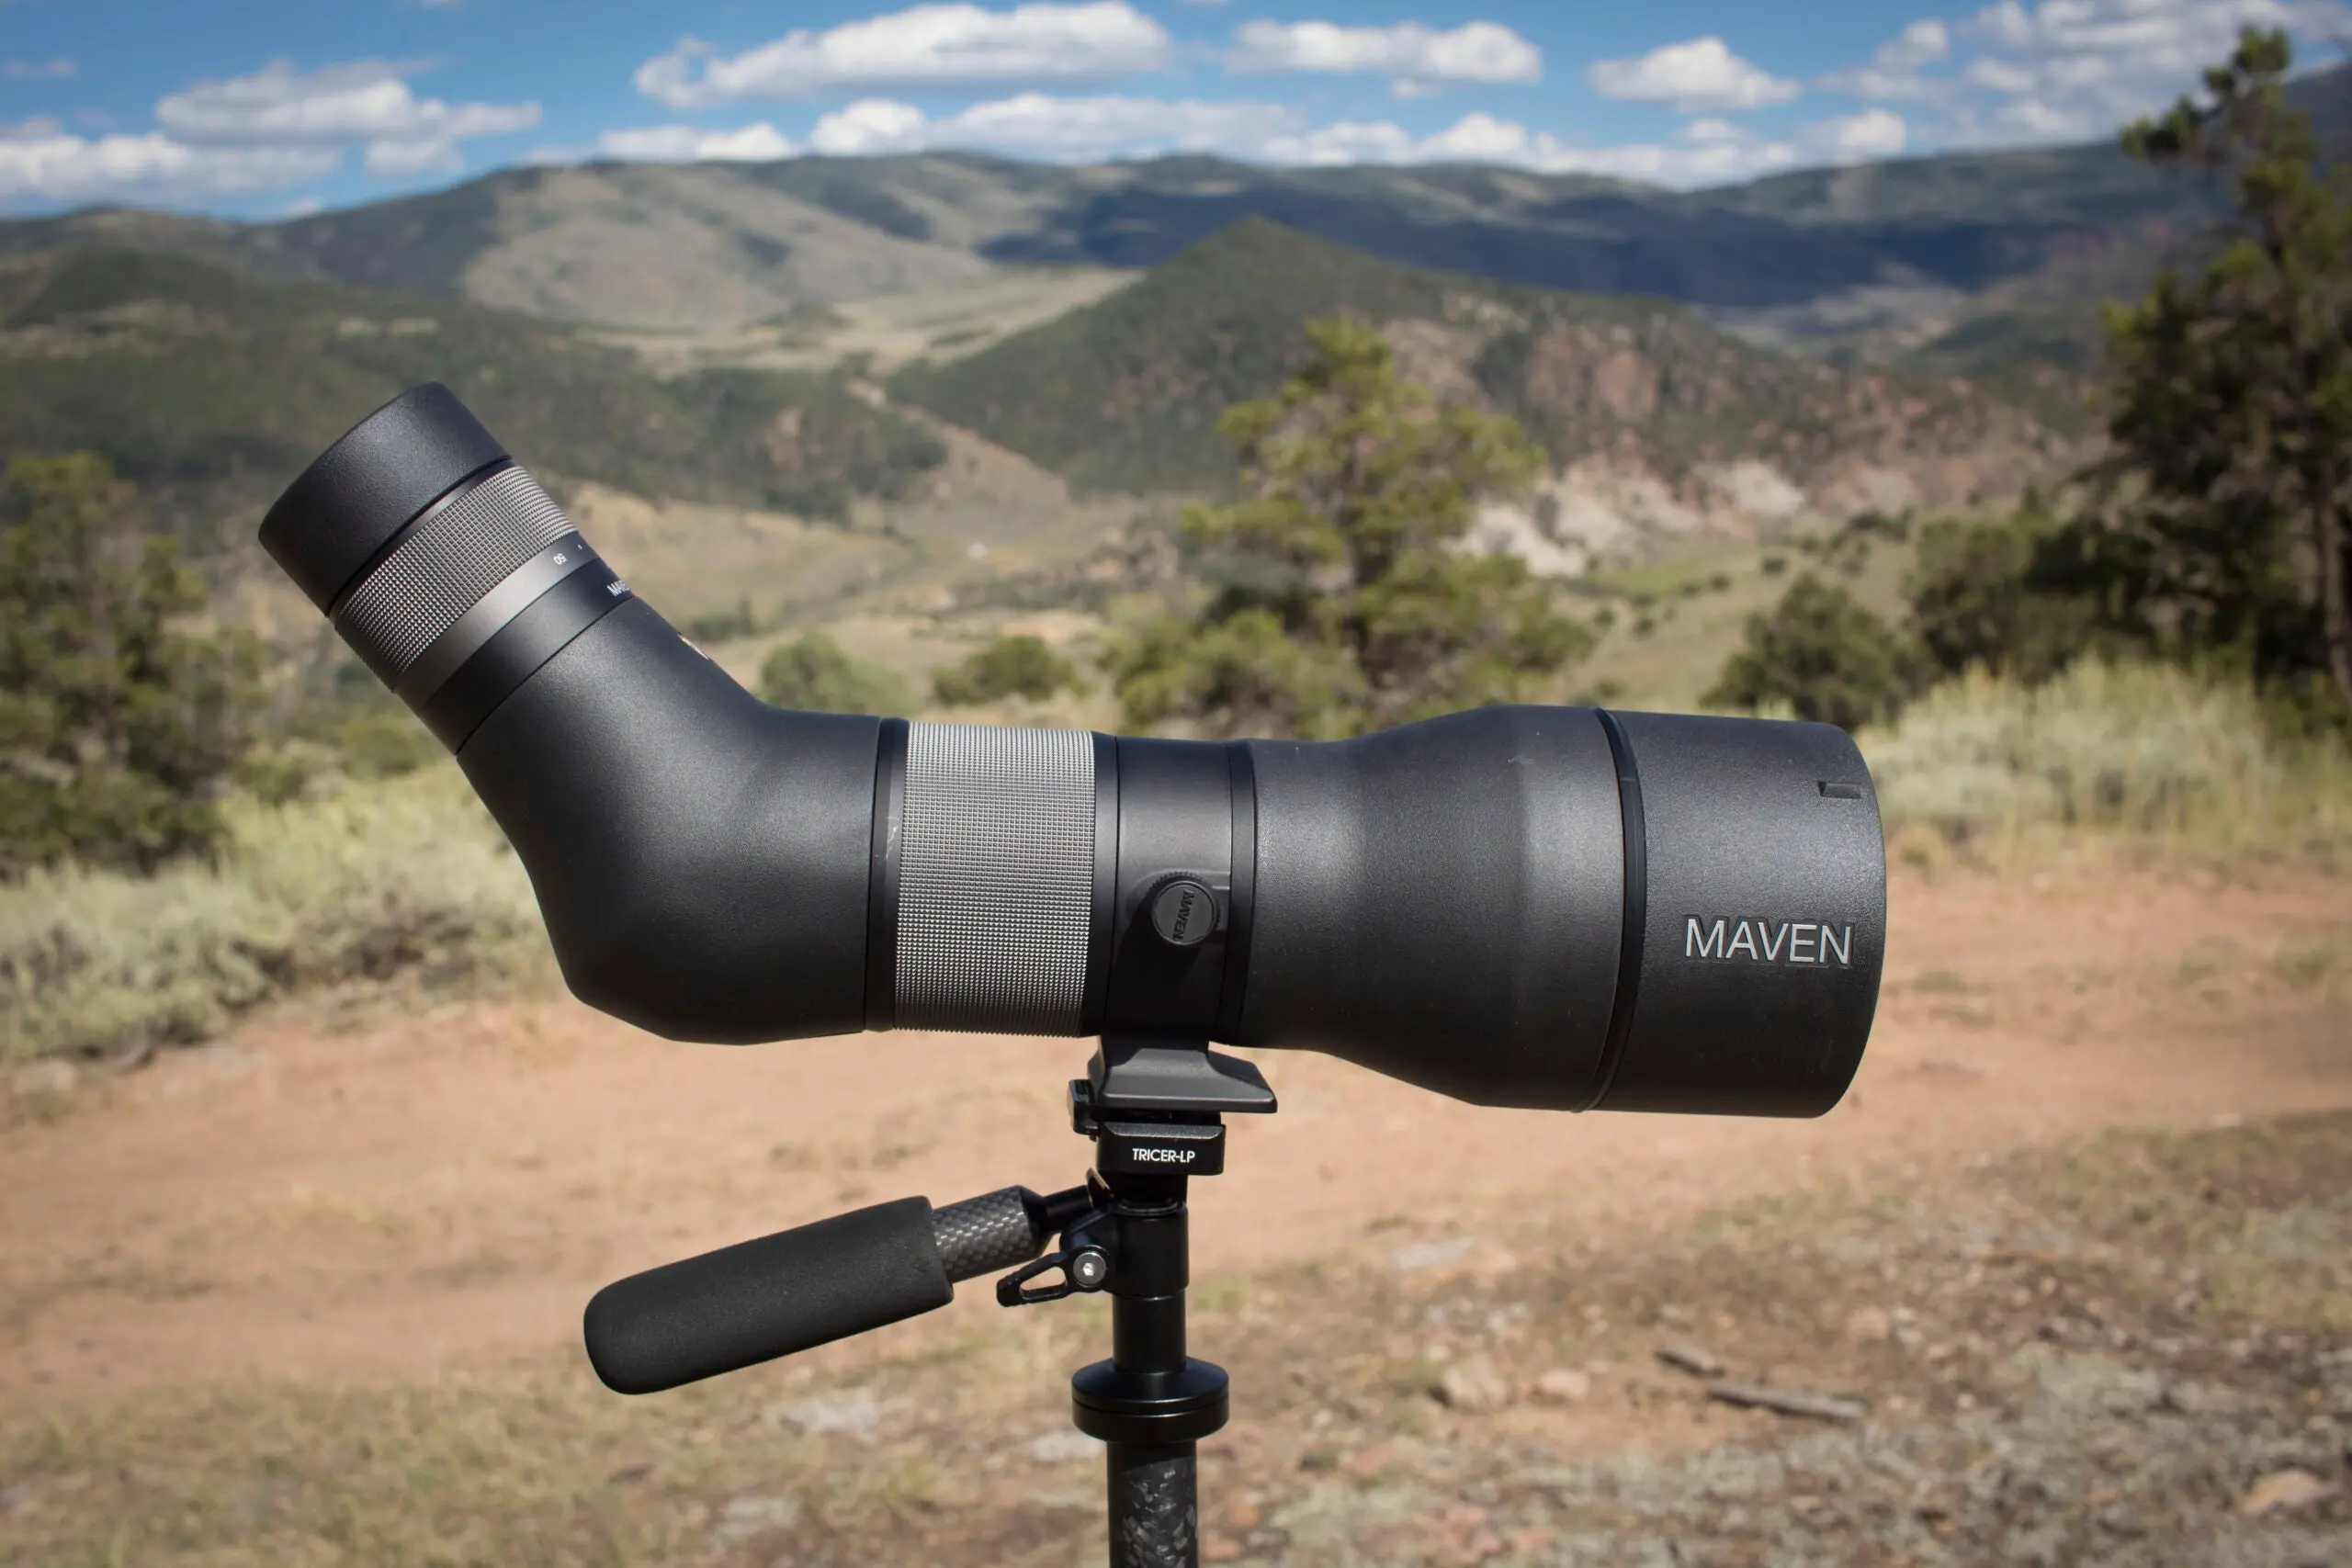 Maven S.1 spotting scope on tripod with mountains in the background